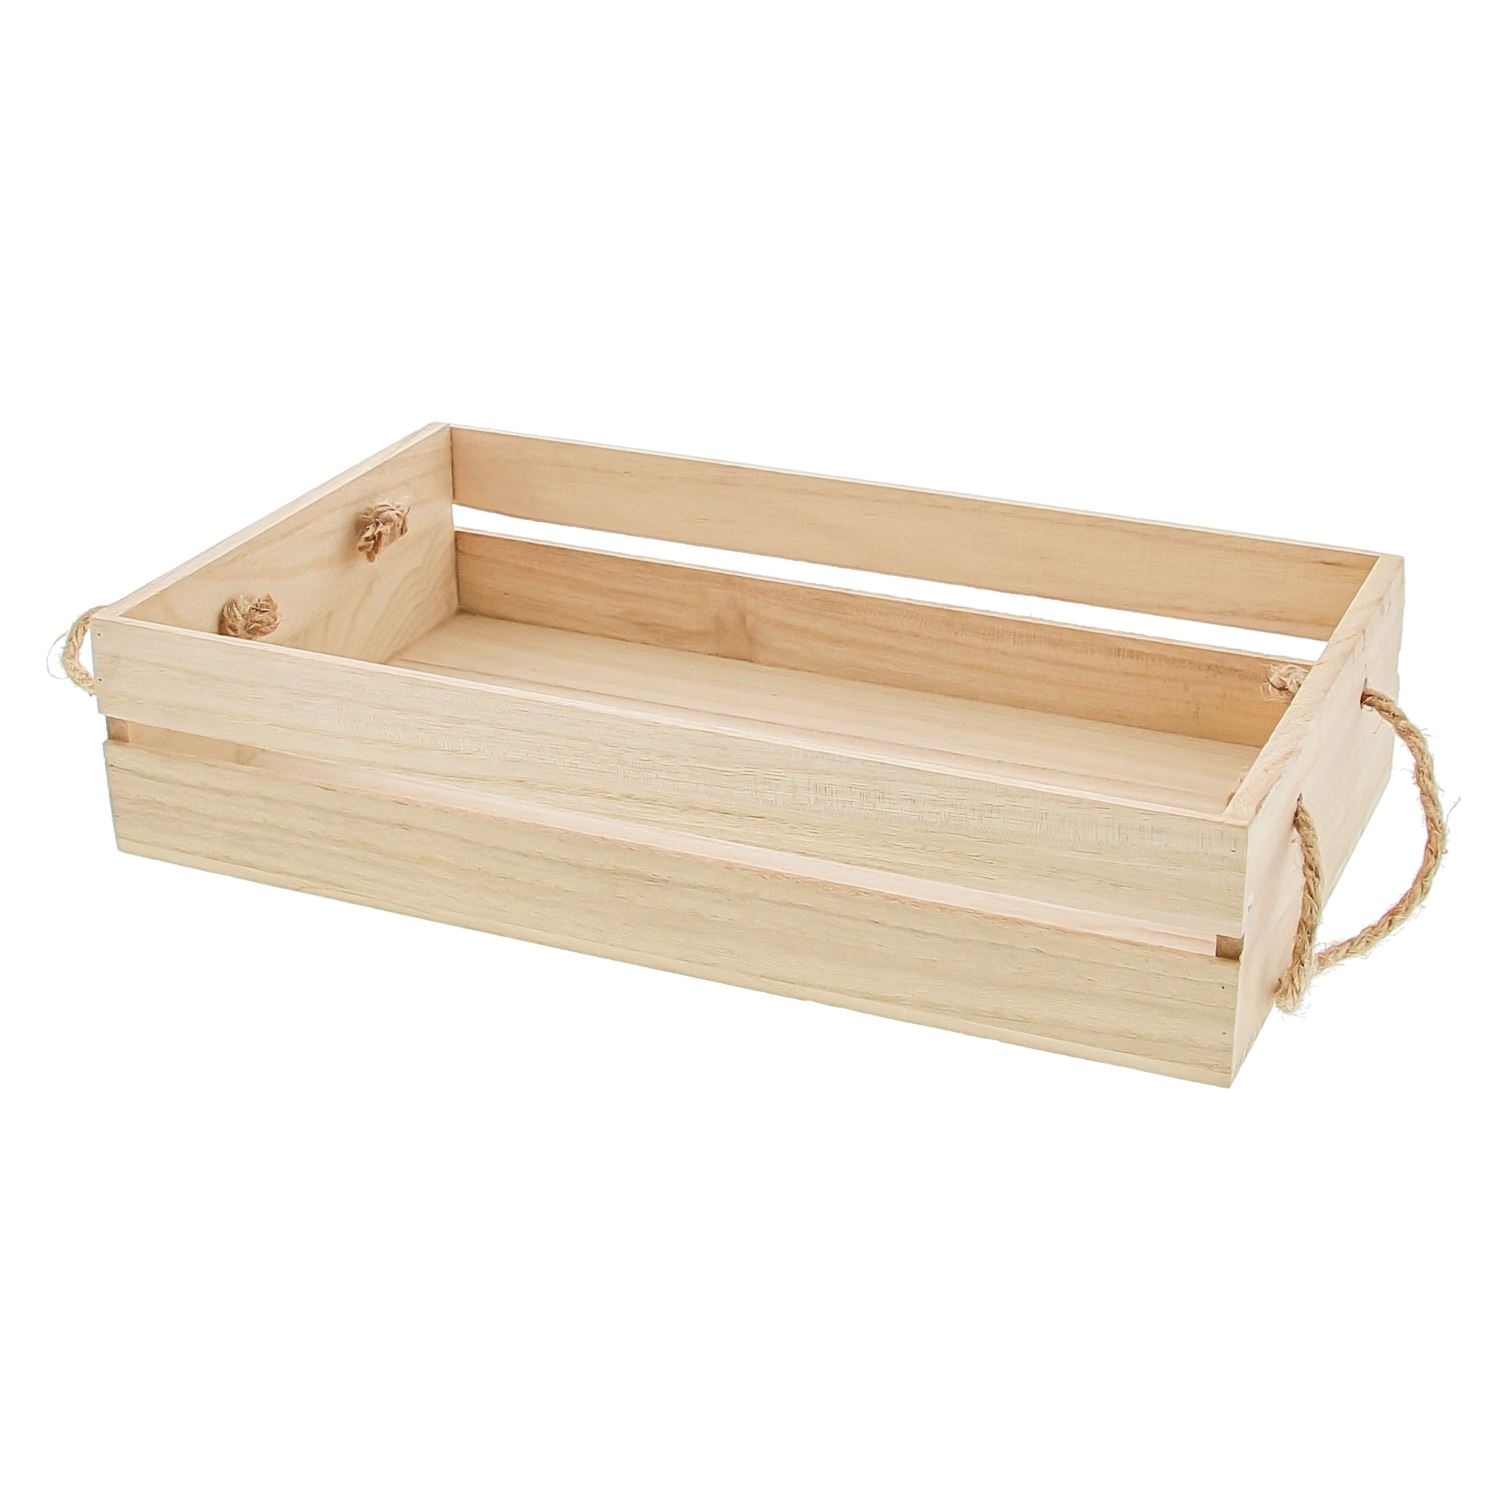 Rectangular wooden box with rope handle - 315*70*195mm - 4 pieces